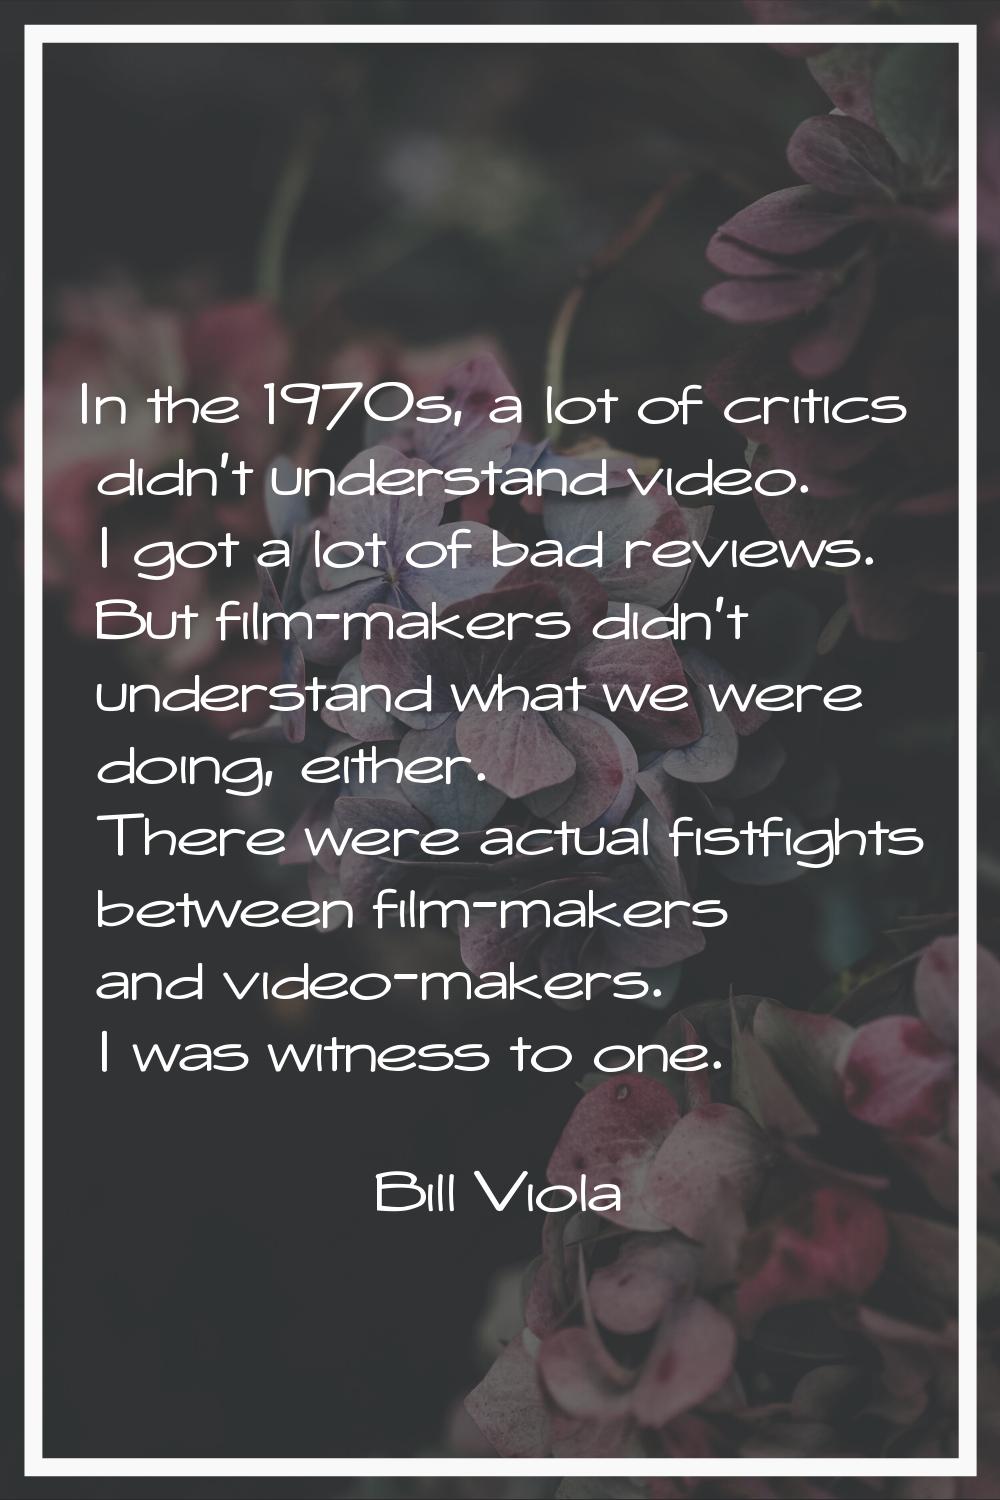 In the 1970s, a lot of critics didn't understand video. I got a lot of bad reviews. But film-makers